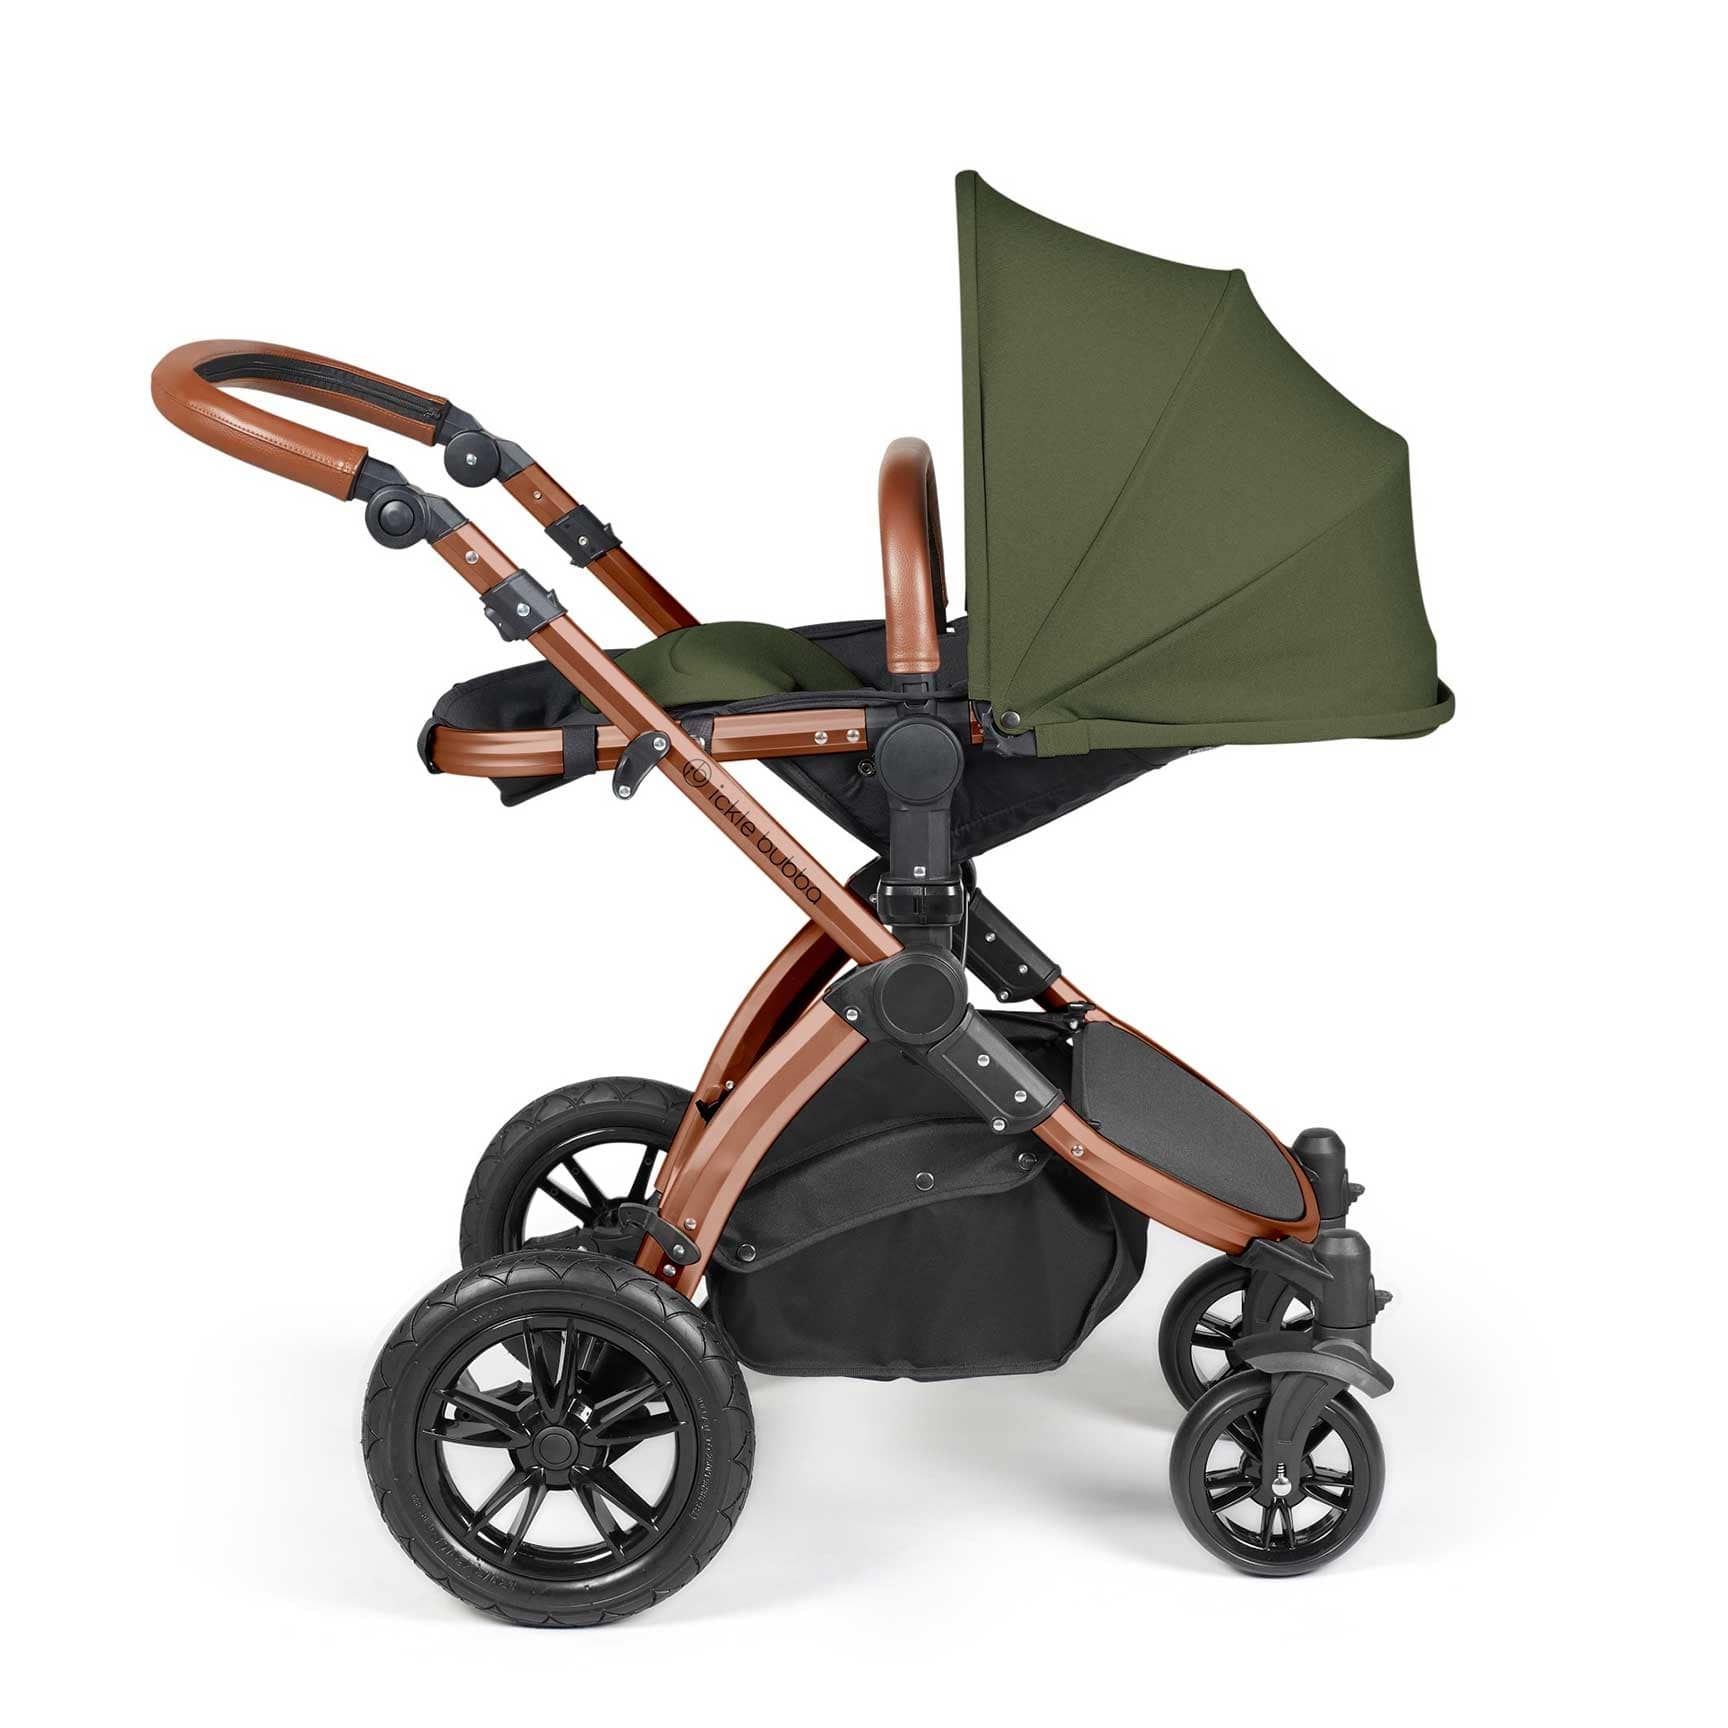 Ickle Bubba travel systems Ickle Bubba Stomp Luxe All-in-One Travel System with Isofix Base - Bronze/Woodland/Tan 10-011-300-022